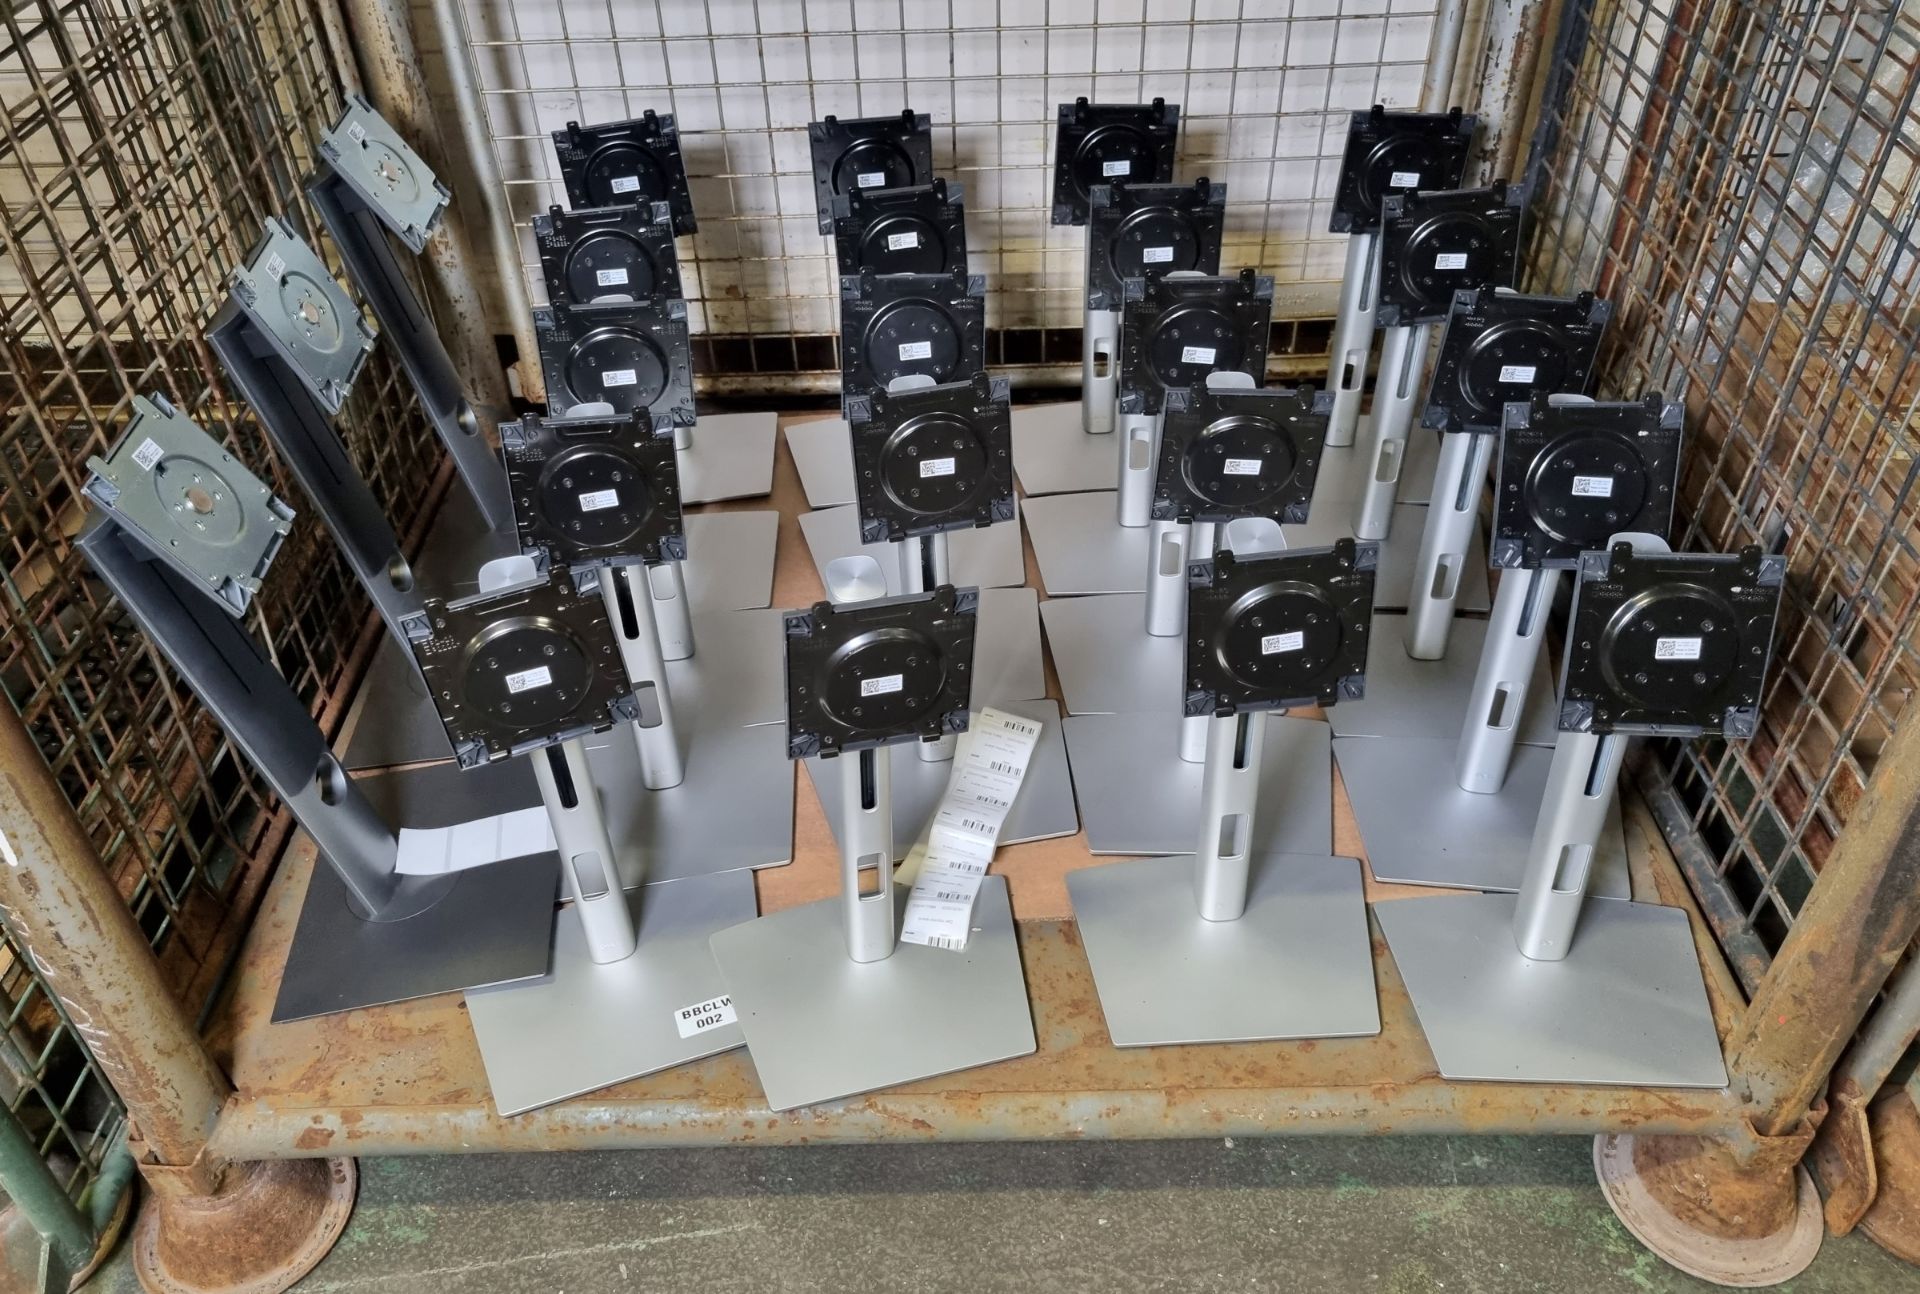 20x Dell monitor stands, 3x Grey Dell monitor stands - Image 2 of 3